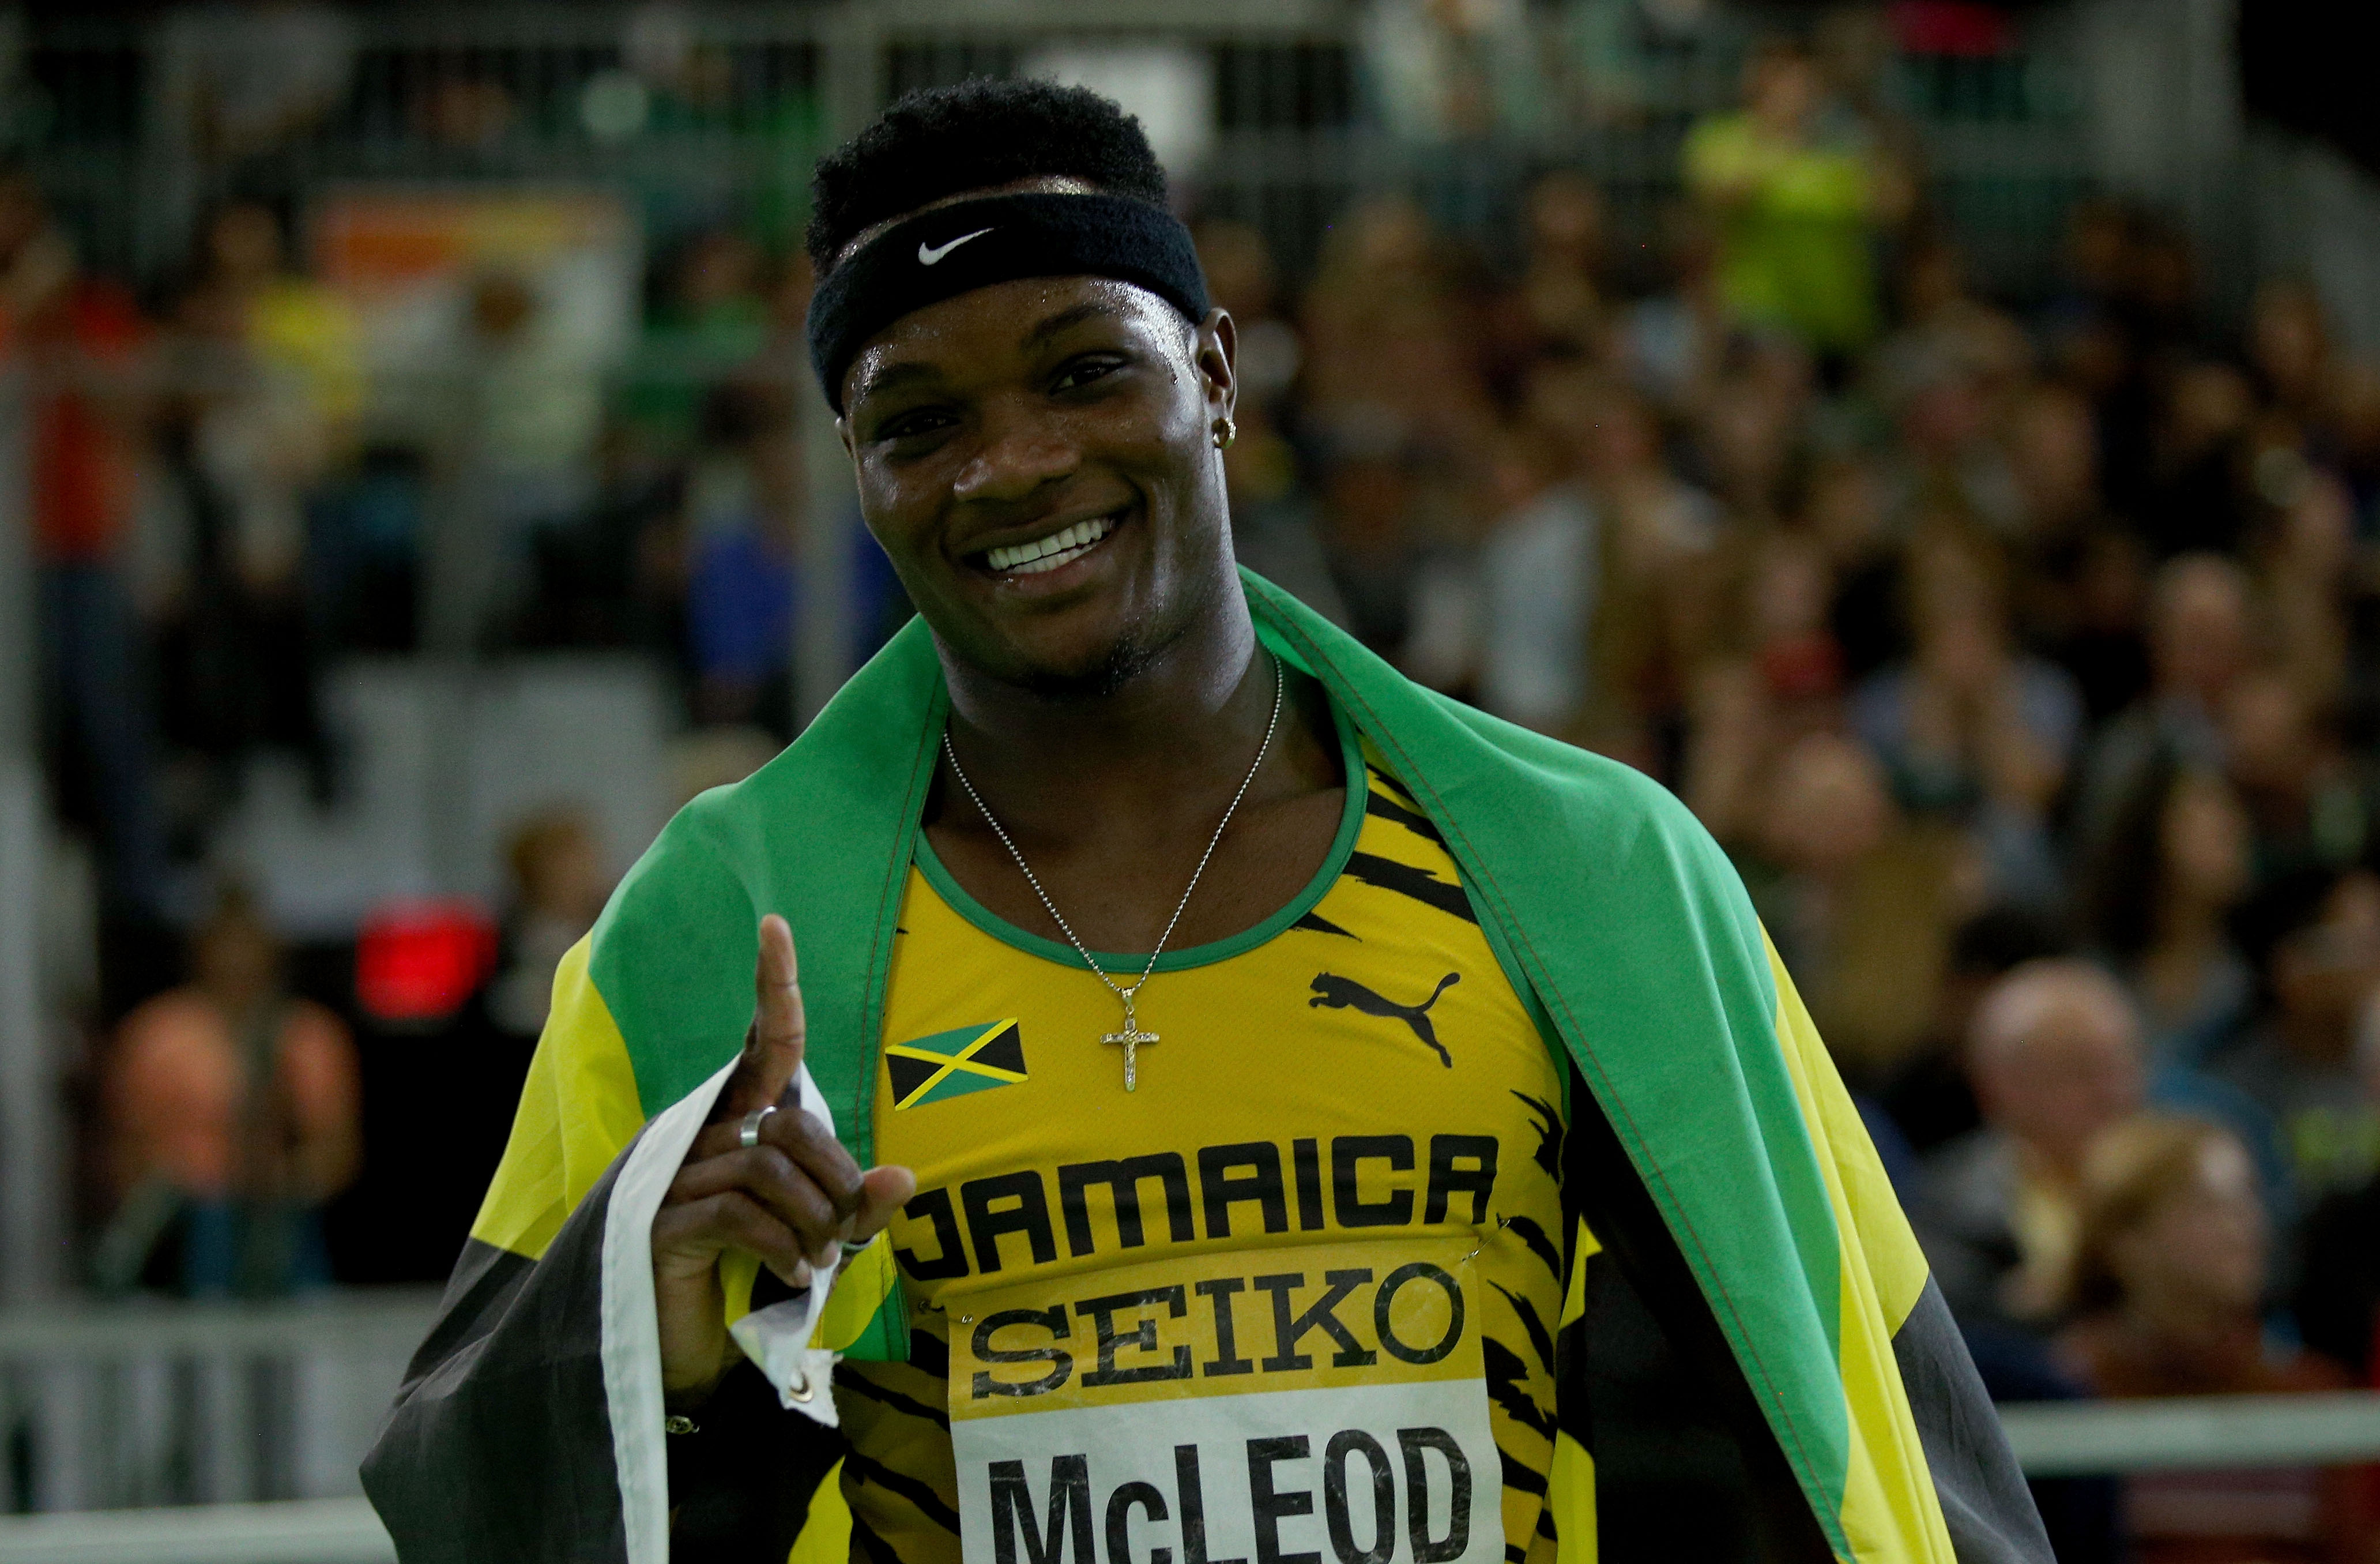 McLeod, Ricketts Secure Wins At Berlin World Challenge Meeting